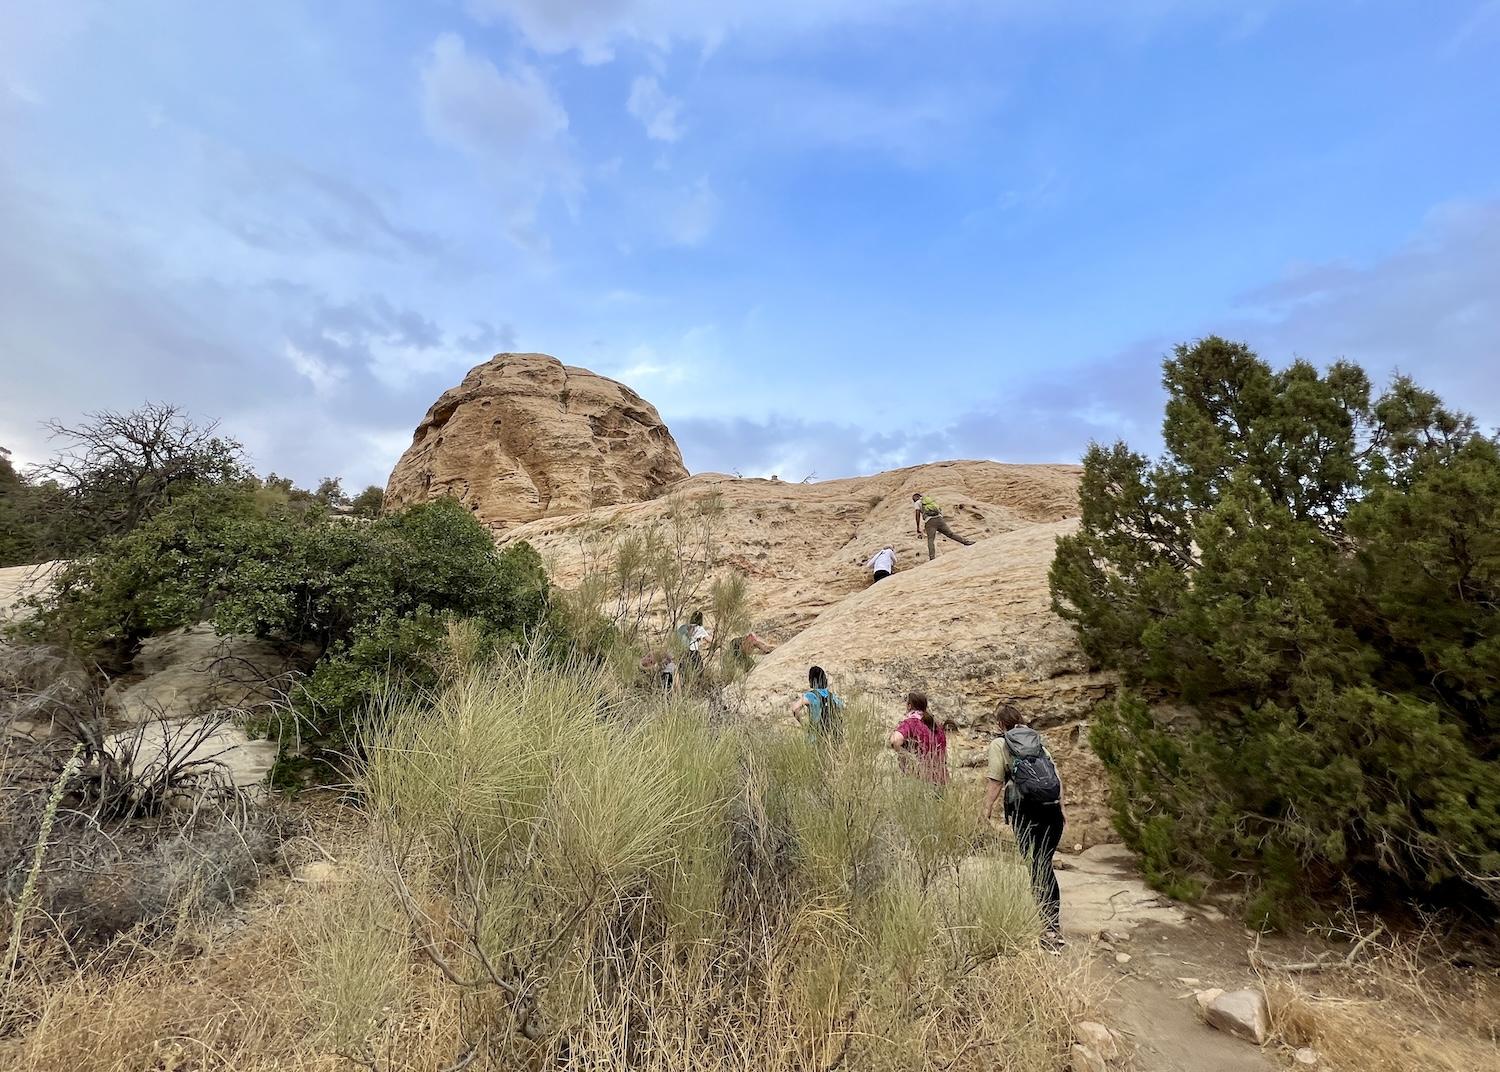 A gentle hike in Dana Biosphere Reserve passes interesting rock formations.